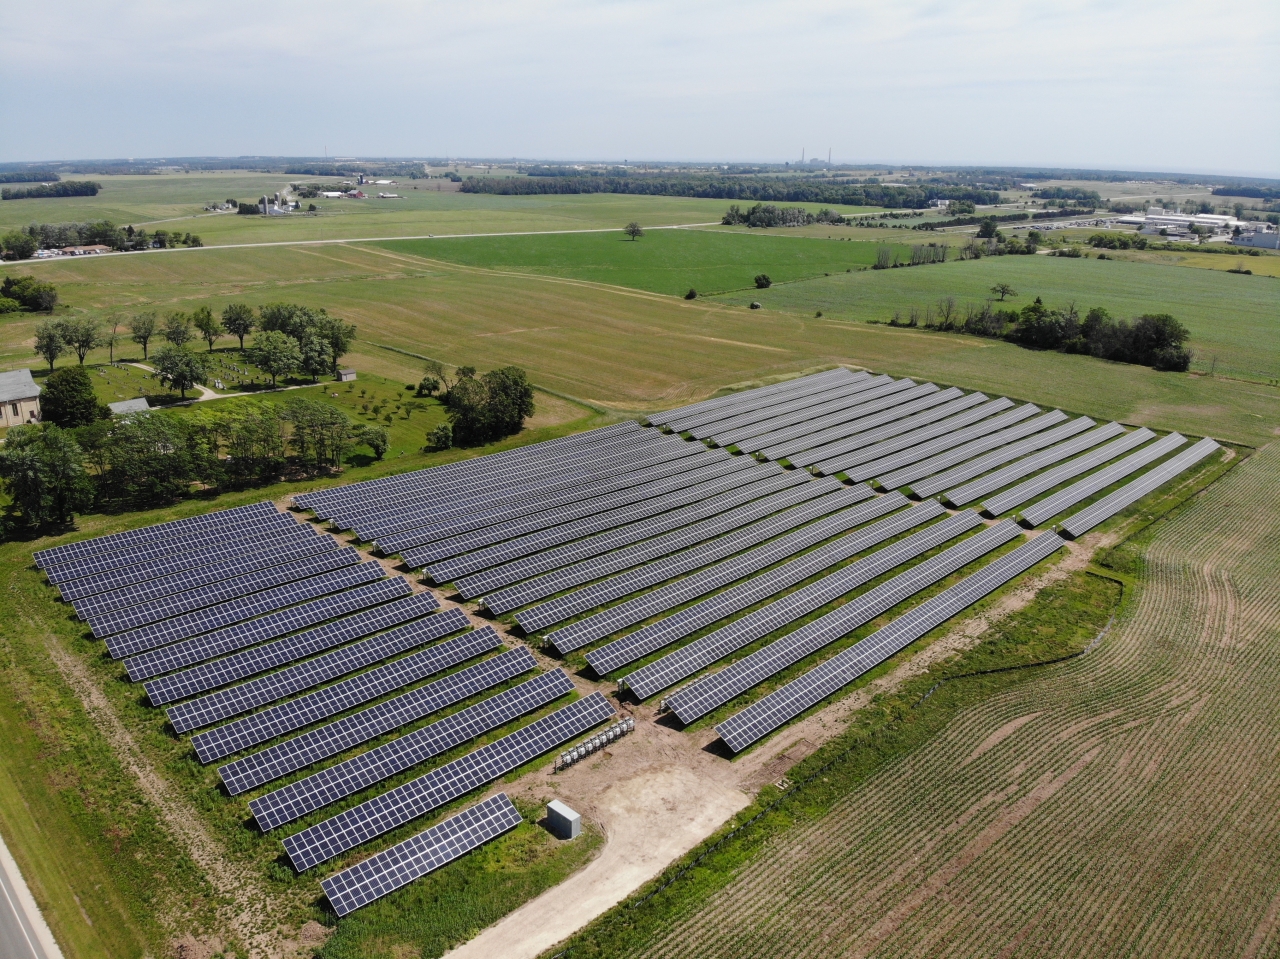 MilliporeSigma, the U.S. and Canada Life Science business of Merck KGaA, Darmstadt, Germany, a leading science and technology company, adds 2.25 megawatts to the grid with 7,000 solar panels at its Sheboygan, Wisconsin, USA site, which are now fully installed.